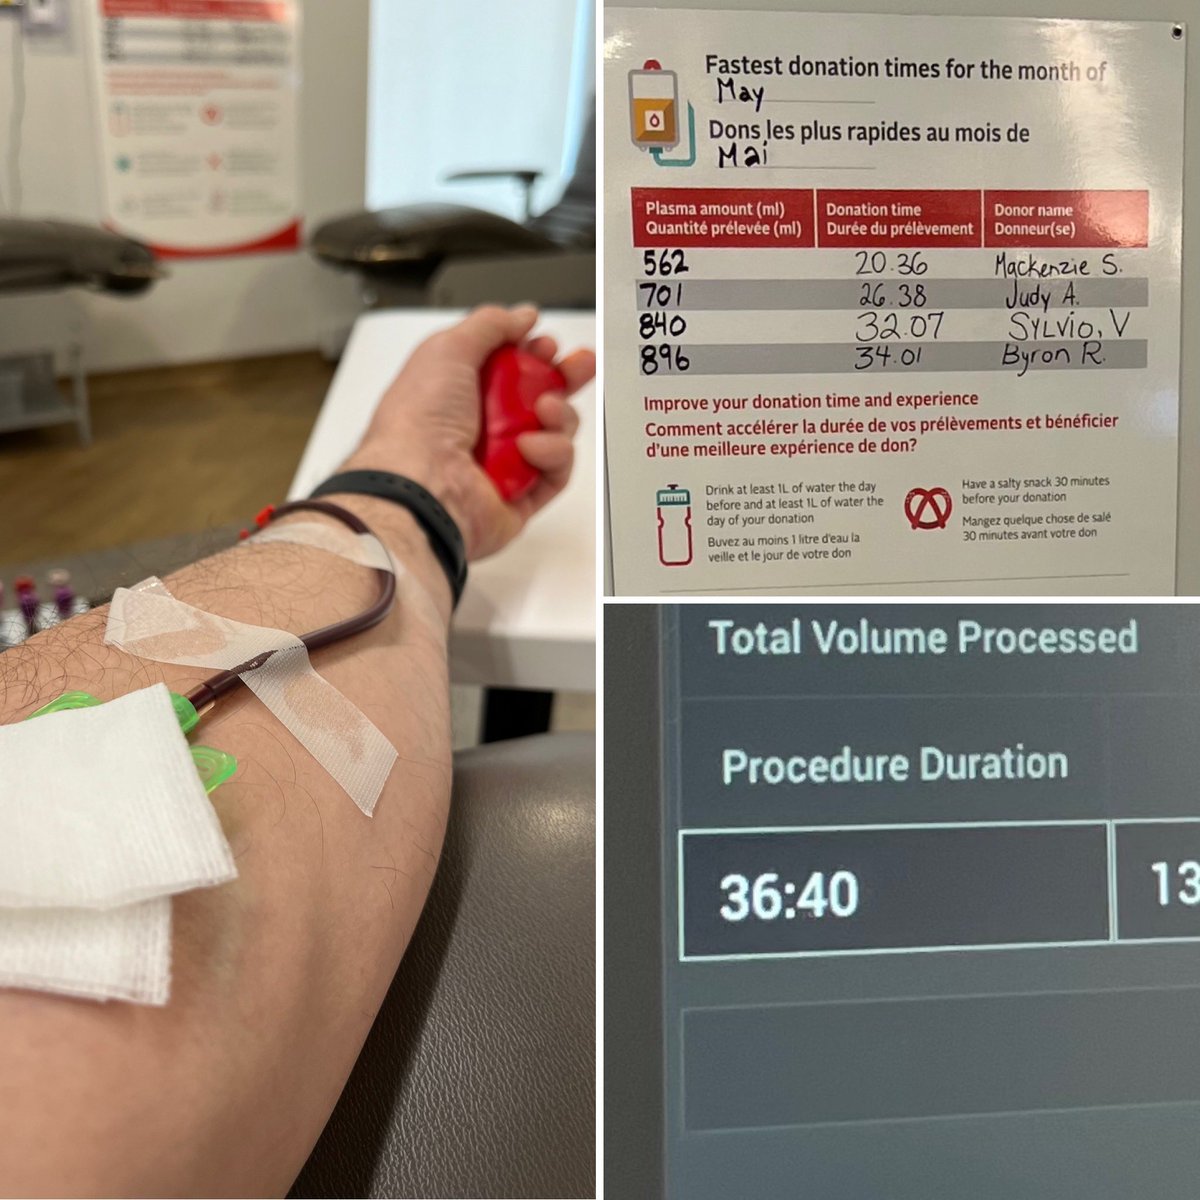 Foiled again!
My #plasma donation was over 2 minutes shy of Sudbury’s “Fastest Donation Time for the Month of May” record! 
#MaybeNextTime
@CanadasLifeline